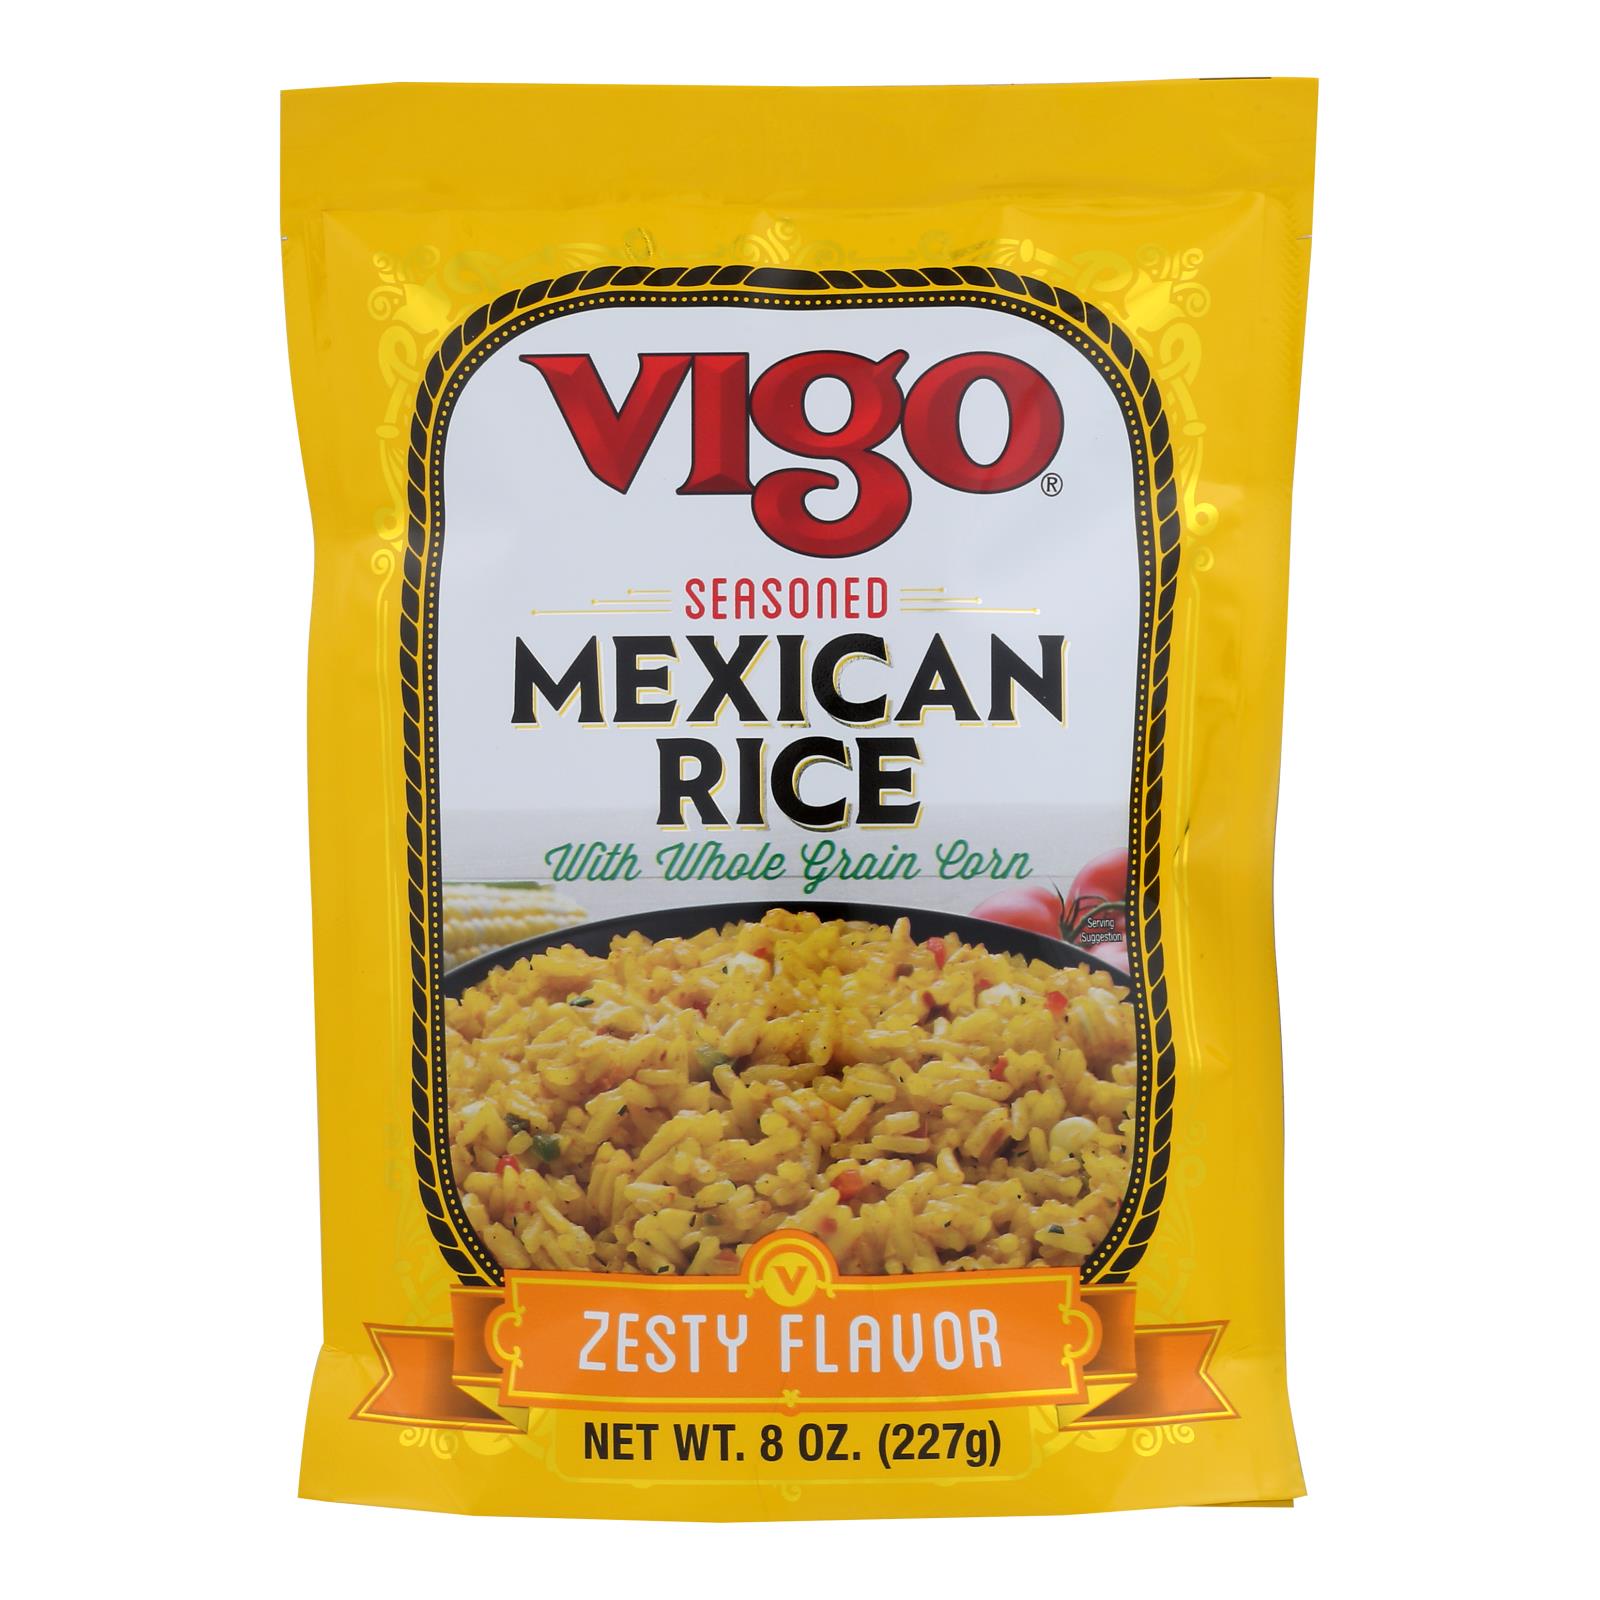 Vigo Rice - Mexican - Upright - Case Of 6 - 8 Oz - Whole Green Foods